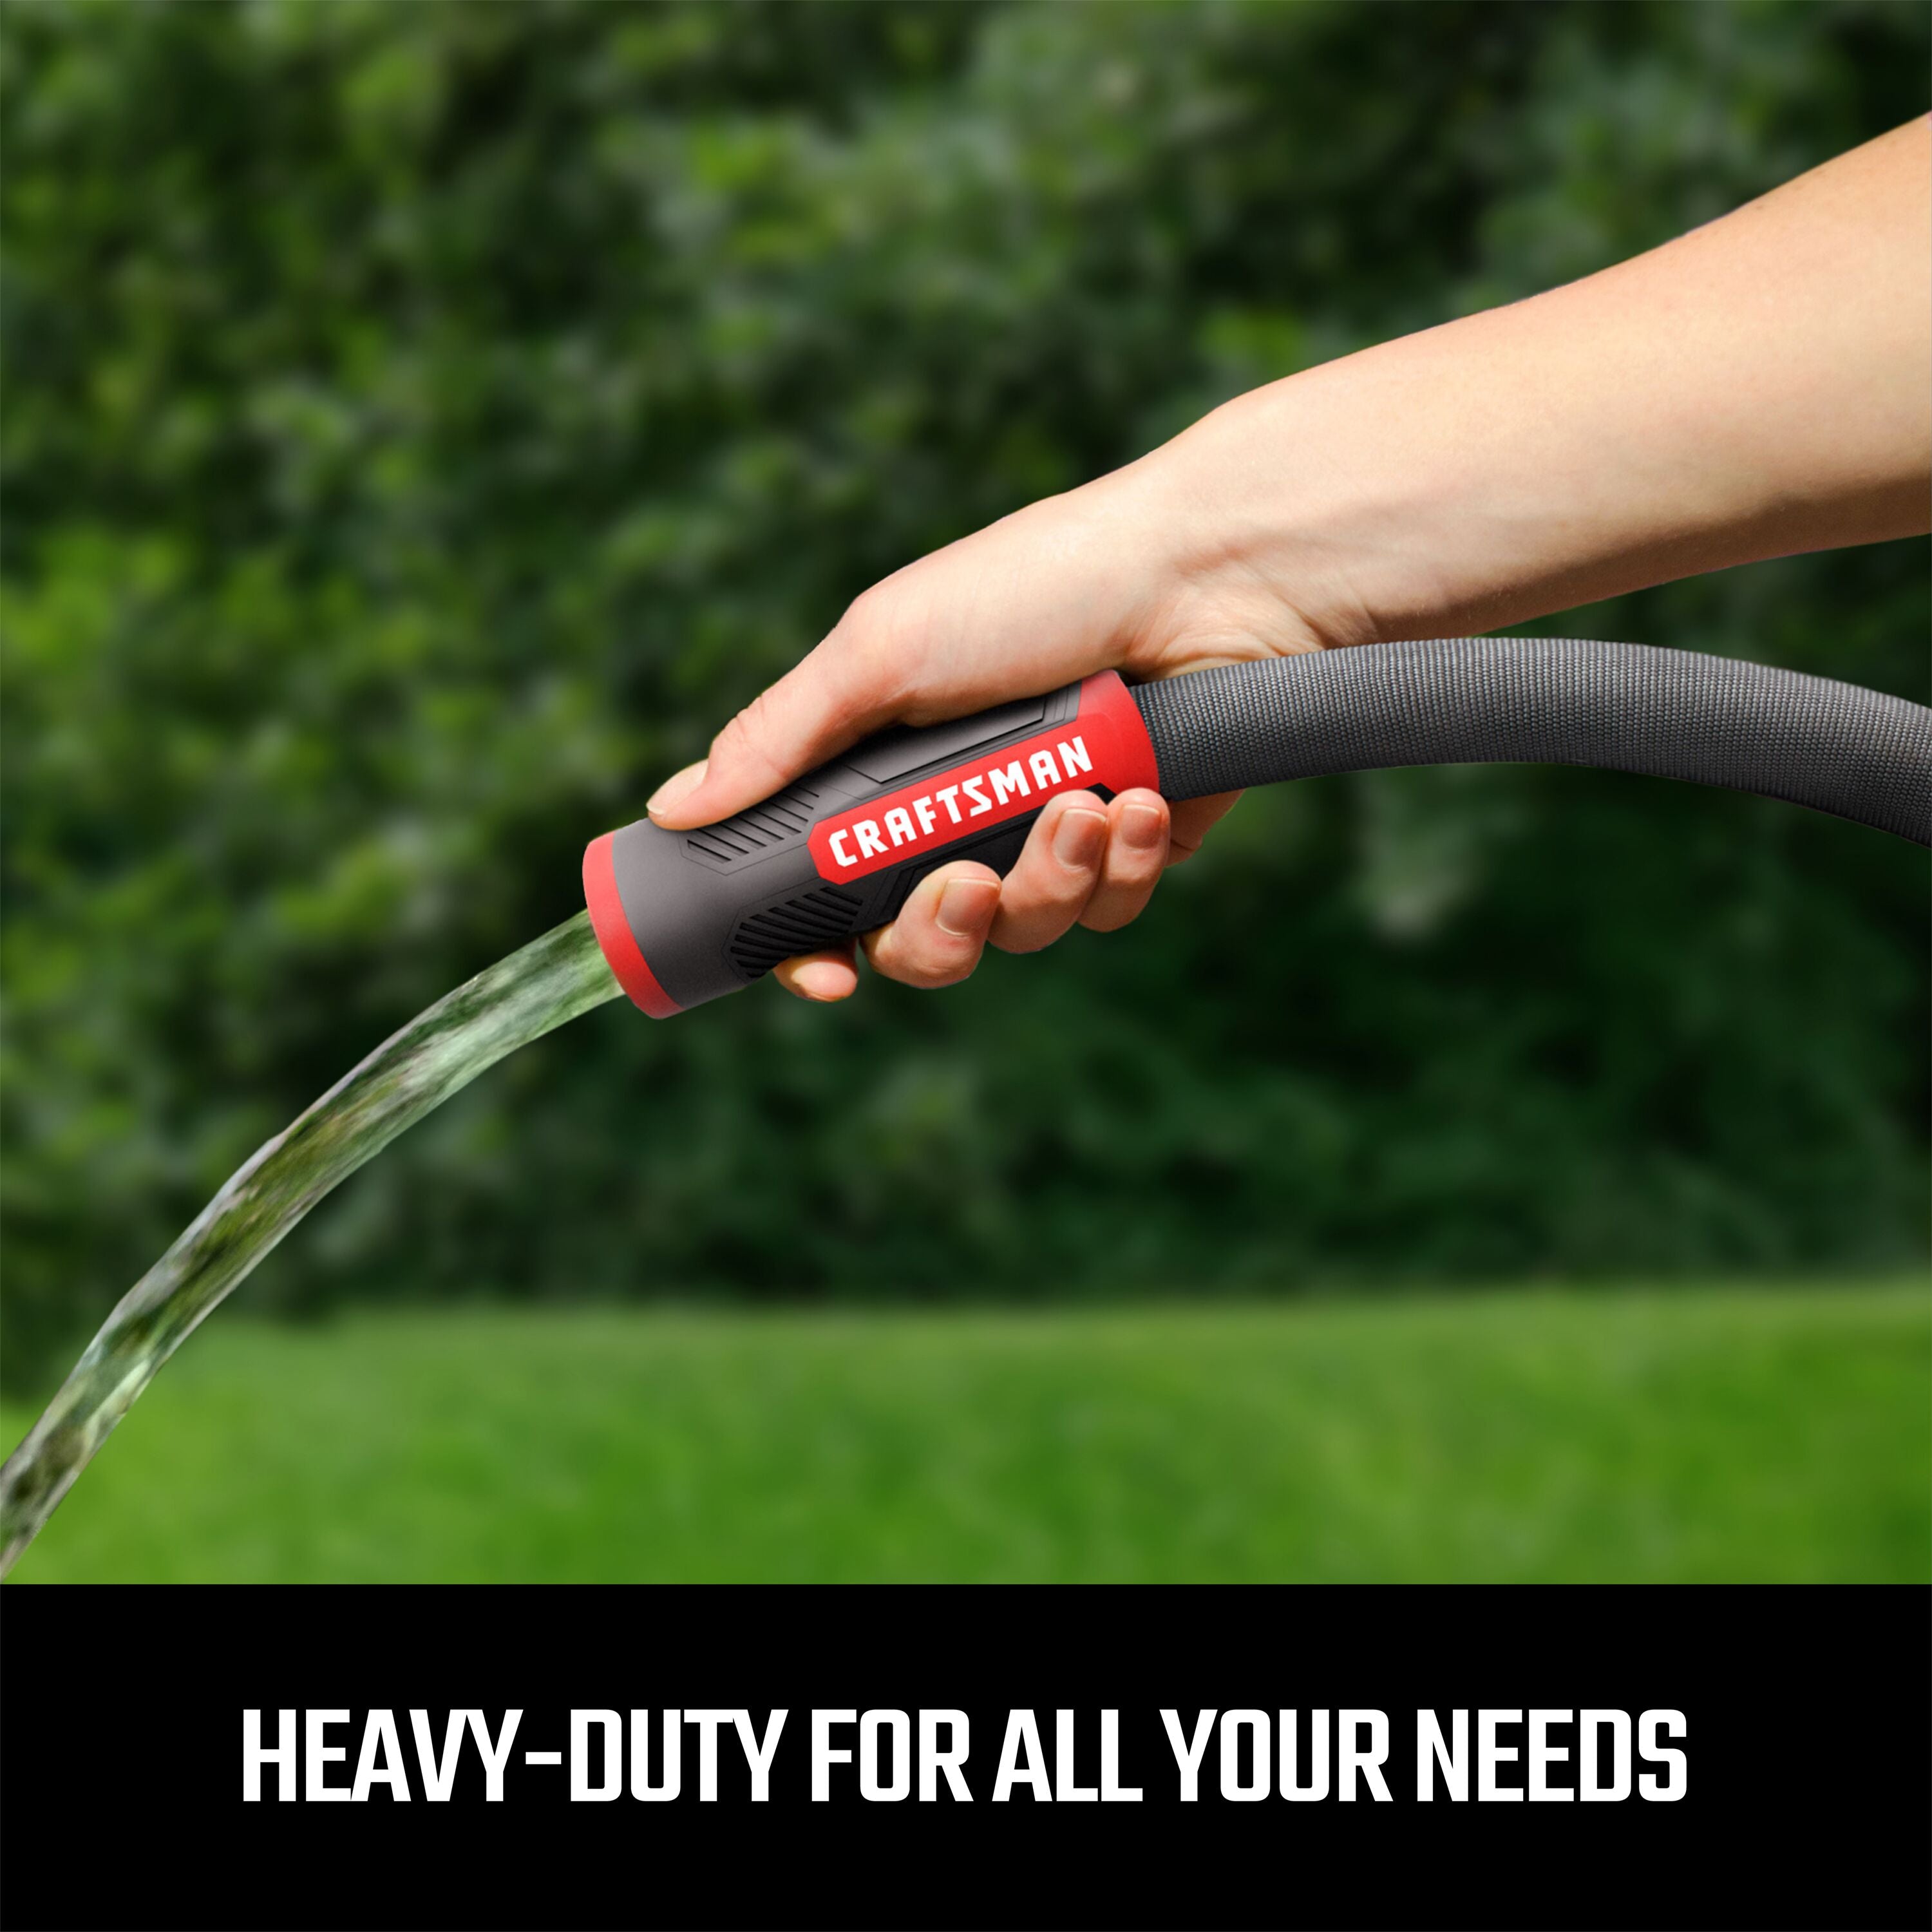 Heavy-duty fabric hose, 50-foot by 5/8 inch. Emitting a stream of water graphic